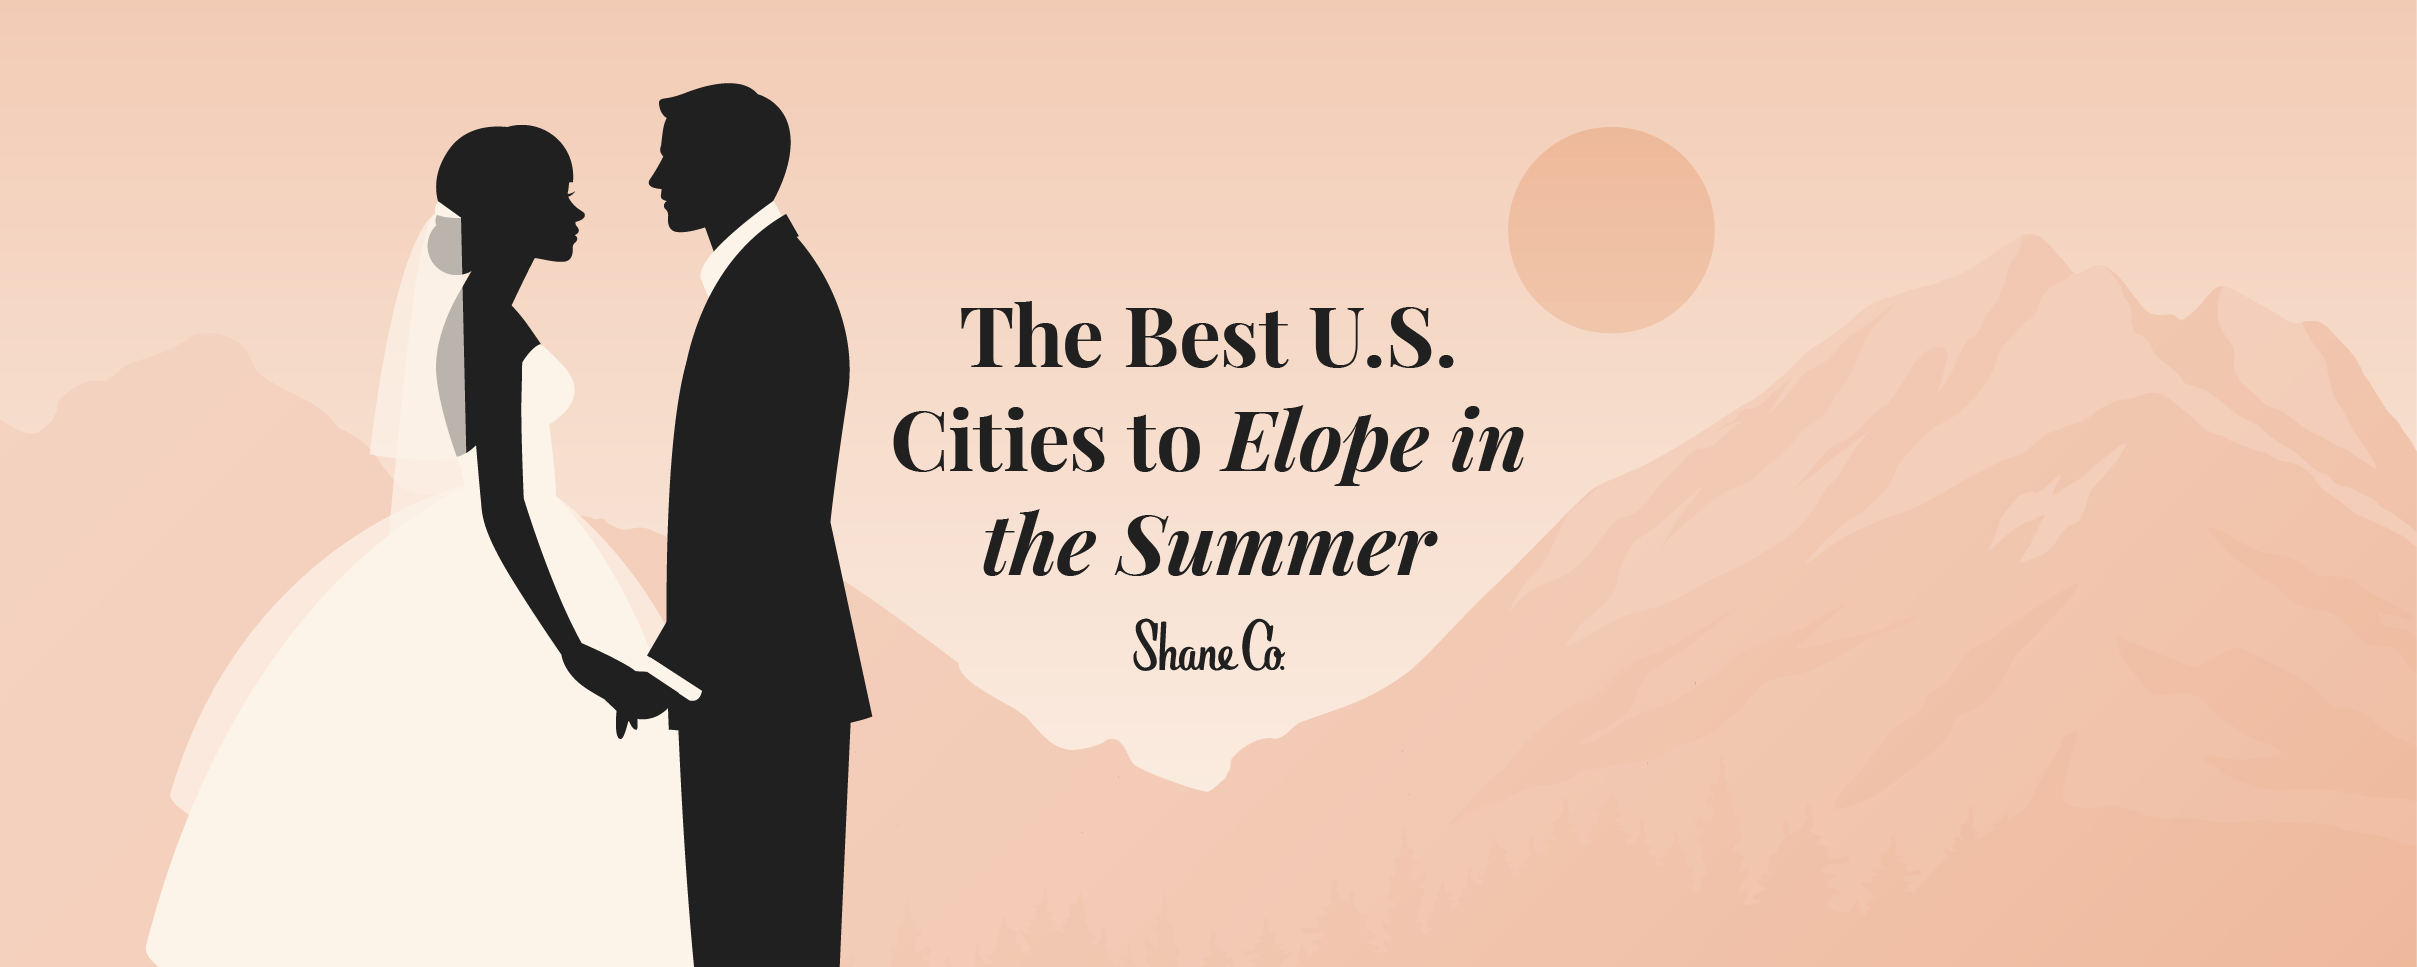 A header image for a blog about the best U.S. cities to elope in